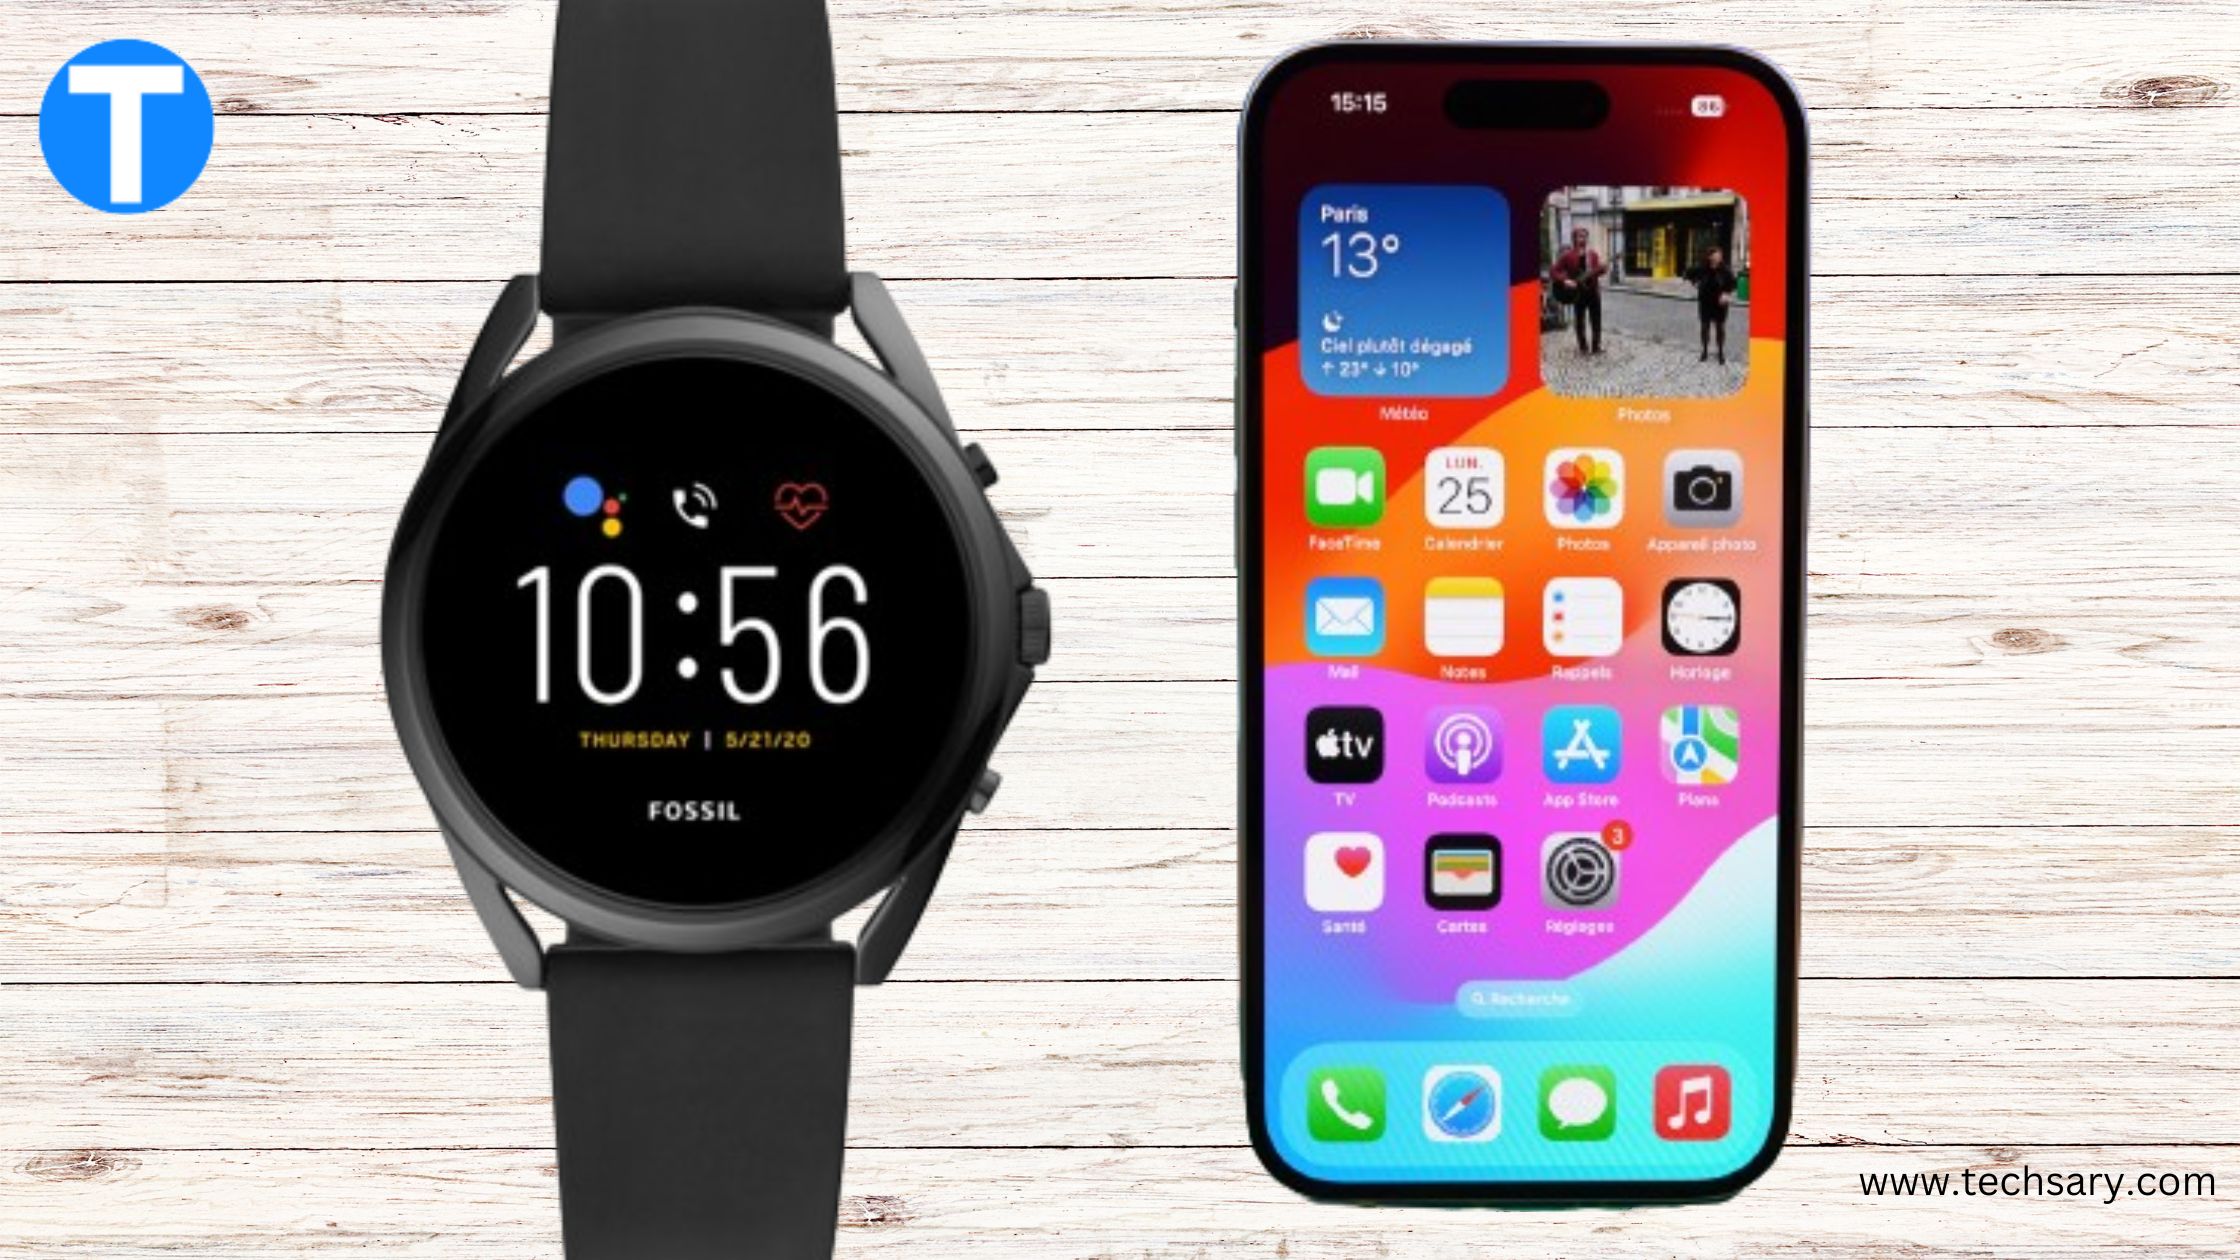 How to Connect a Fossil Smartwatch to an iPhone